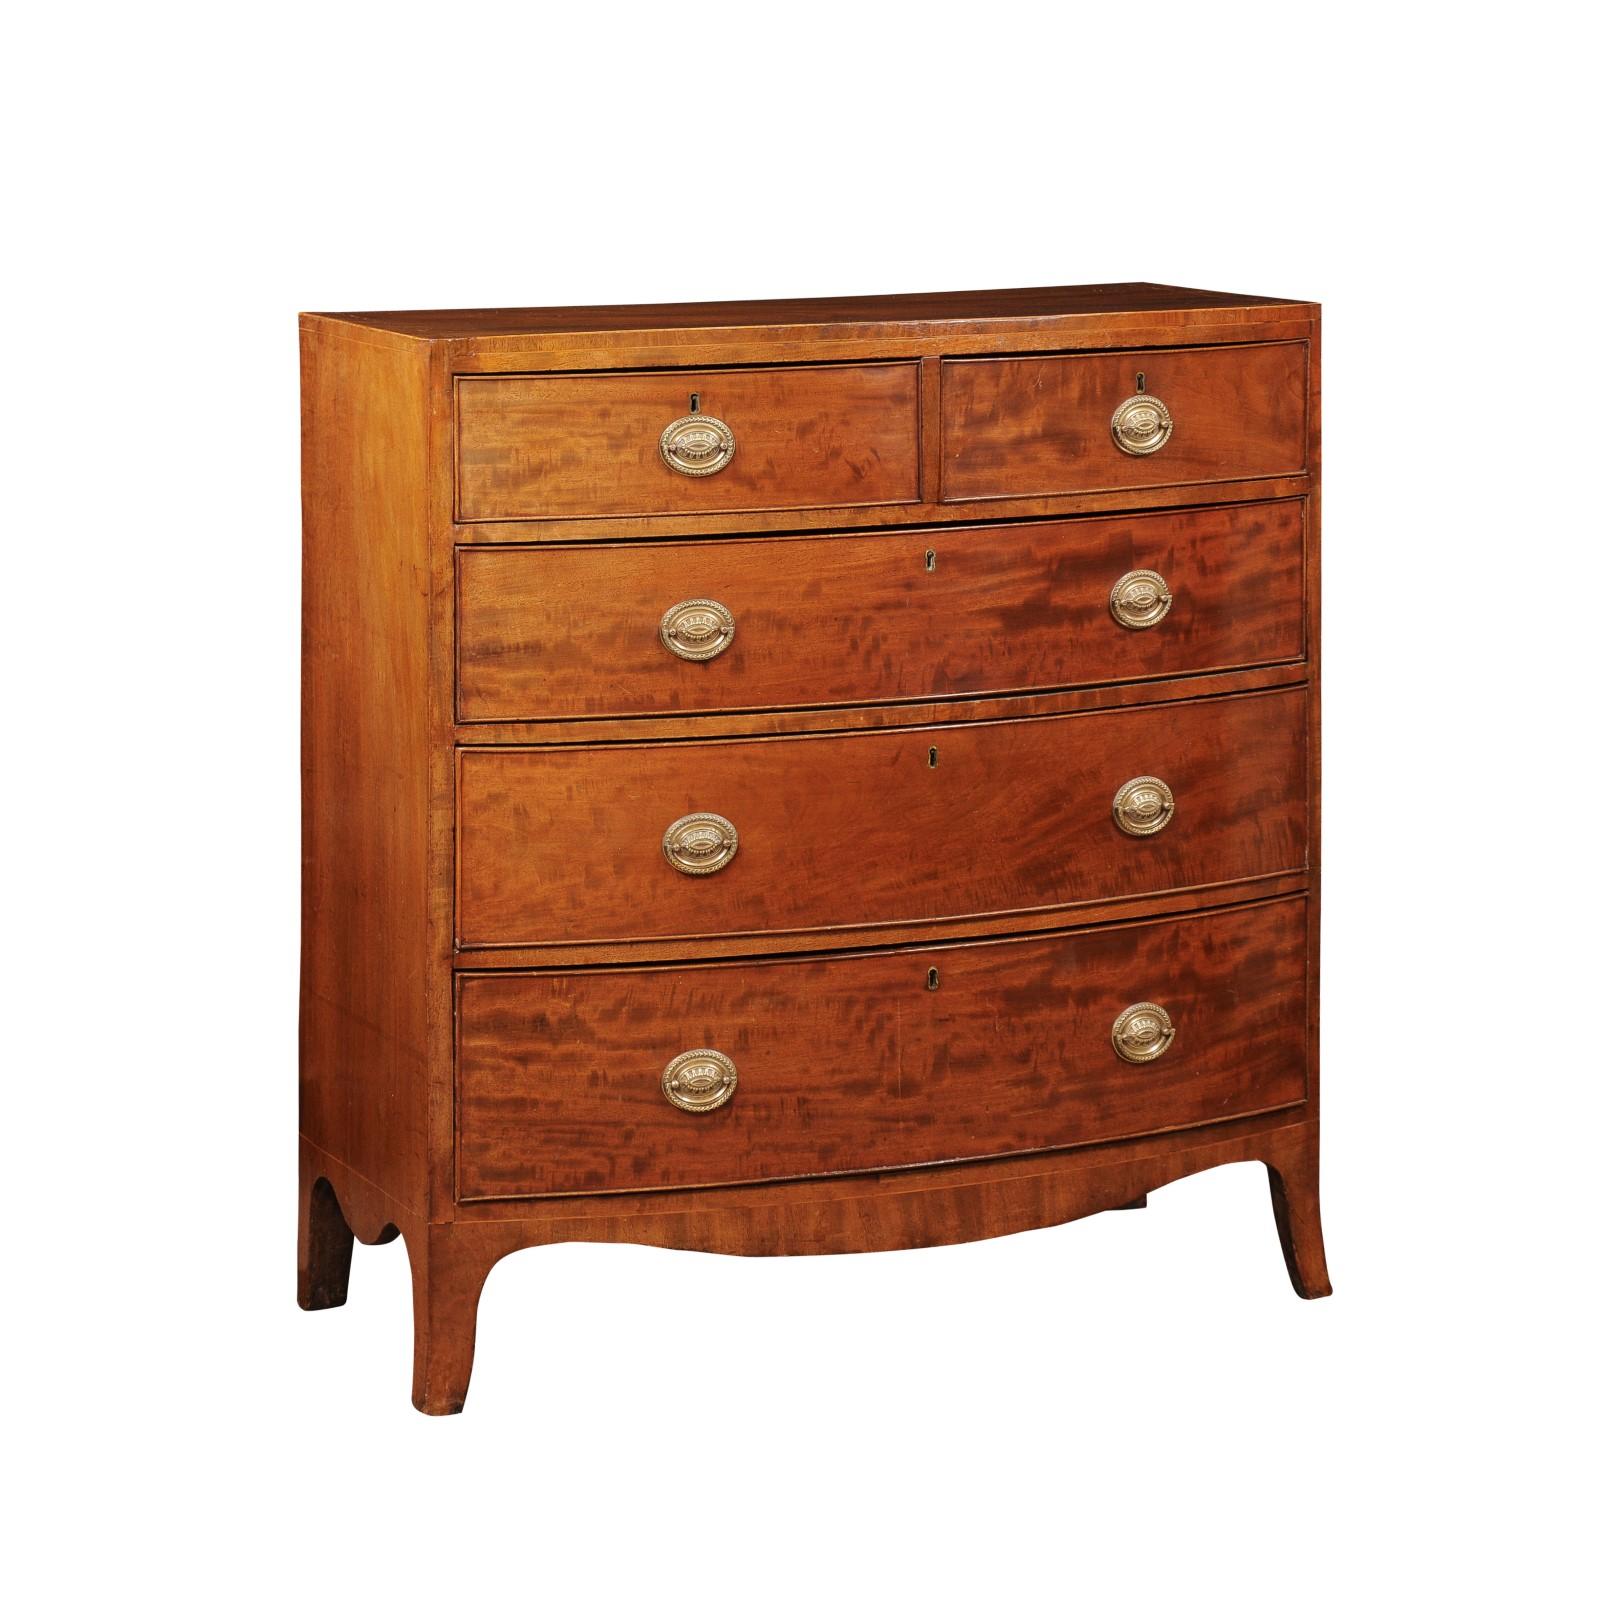 19th Century English Mahogany Bowfront Chest with String Inlay, 5 Drawers  For Sale 6